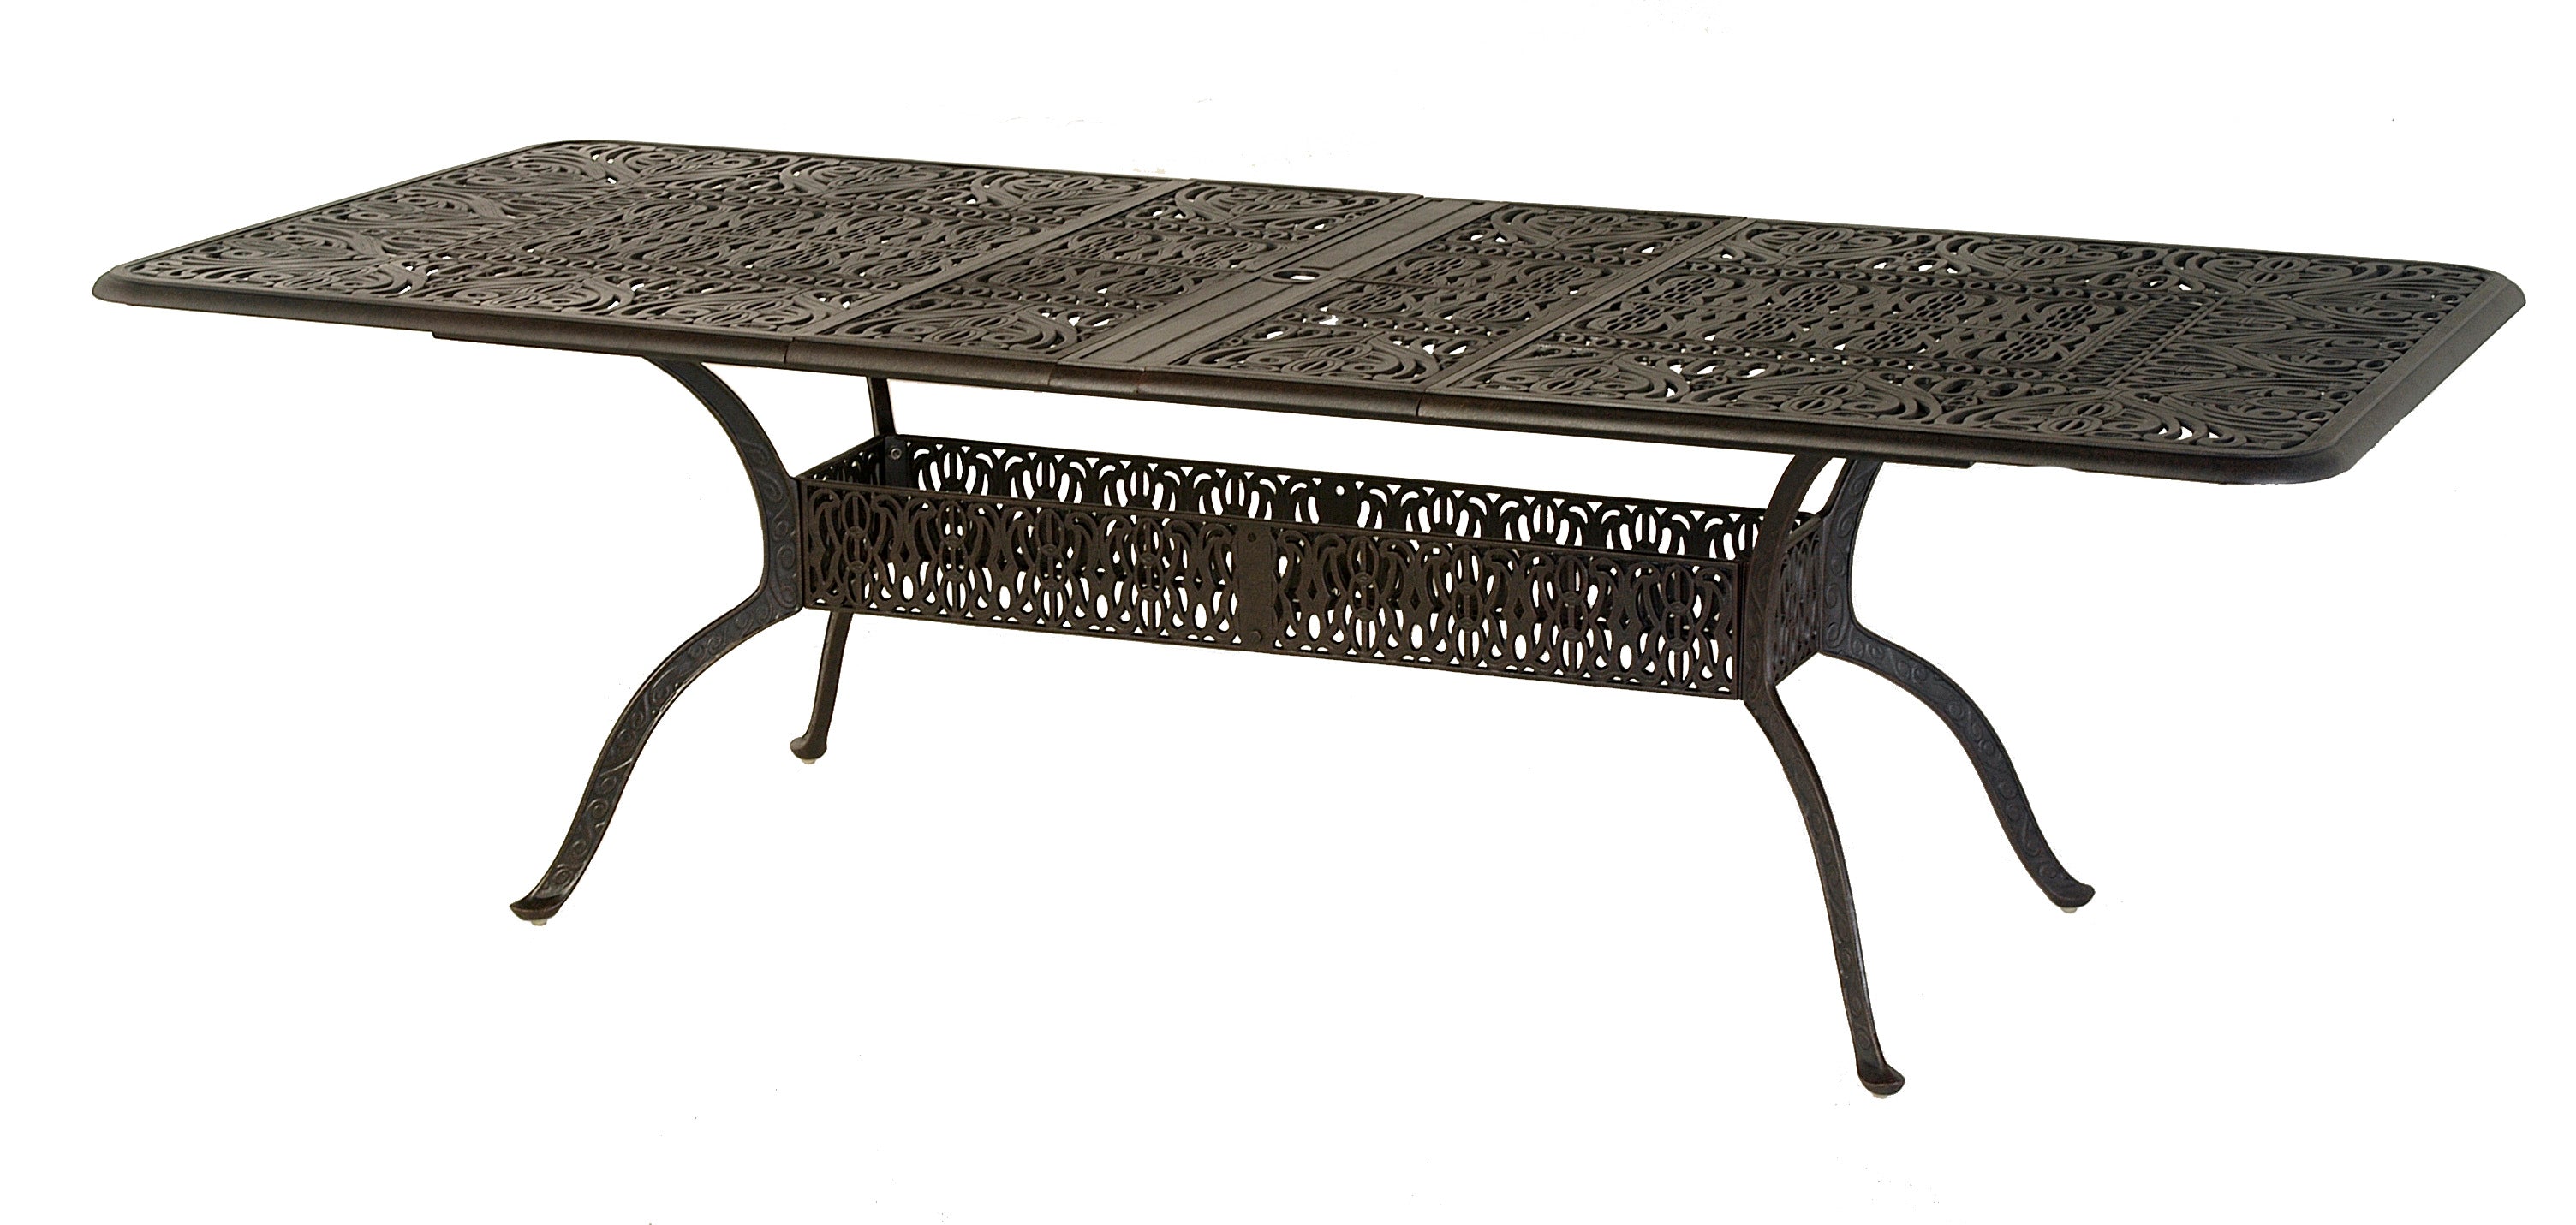 Tuscany 42" x 76" Rect. Extension Table By Hanamint